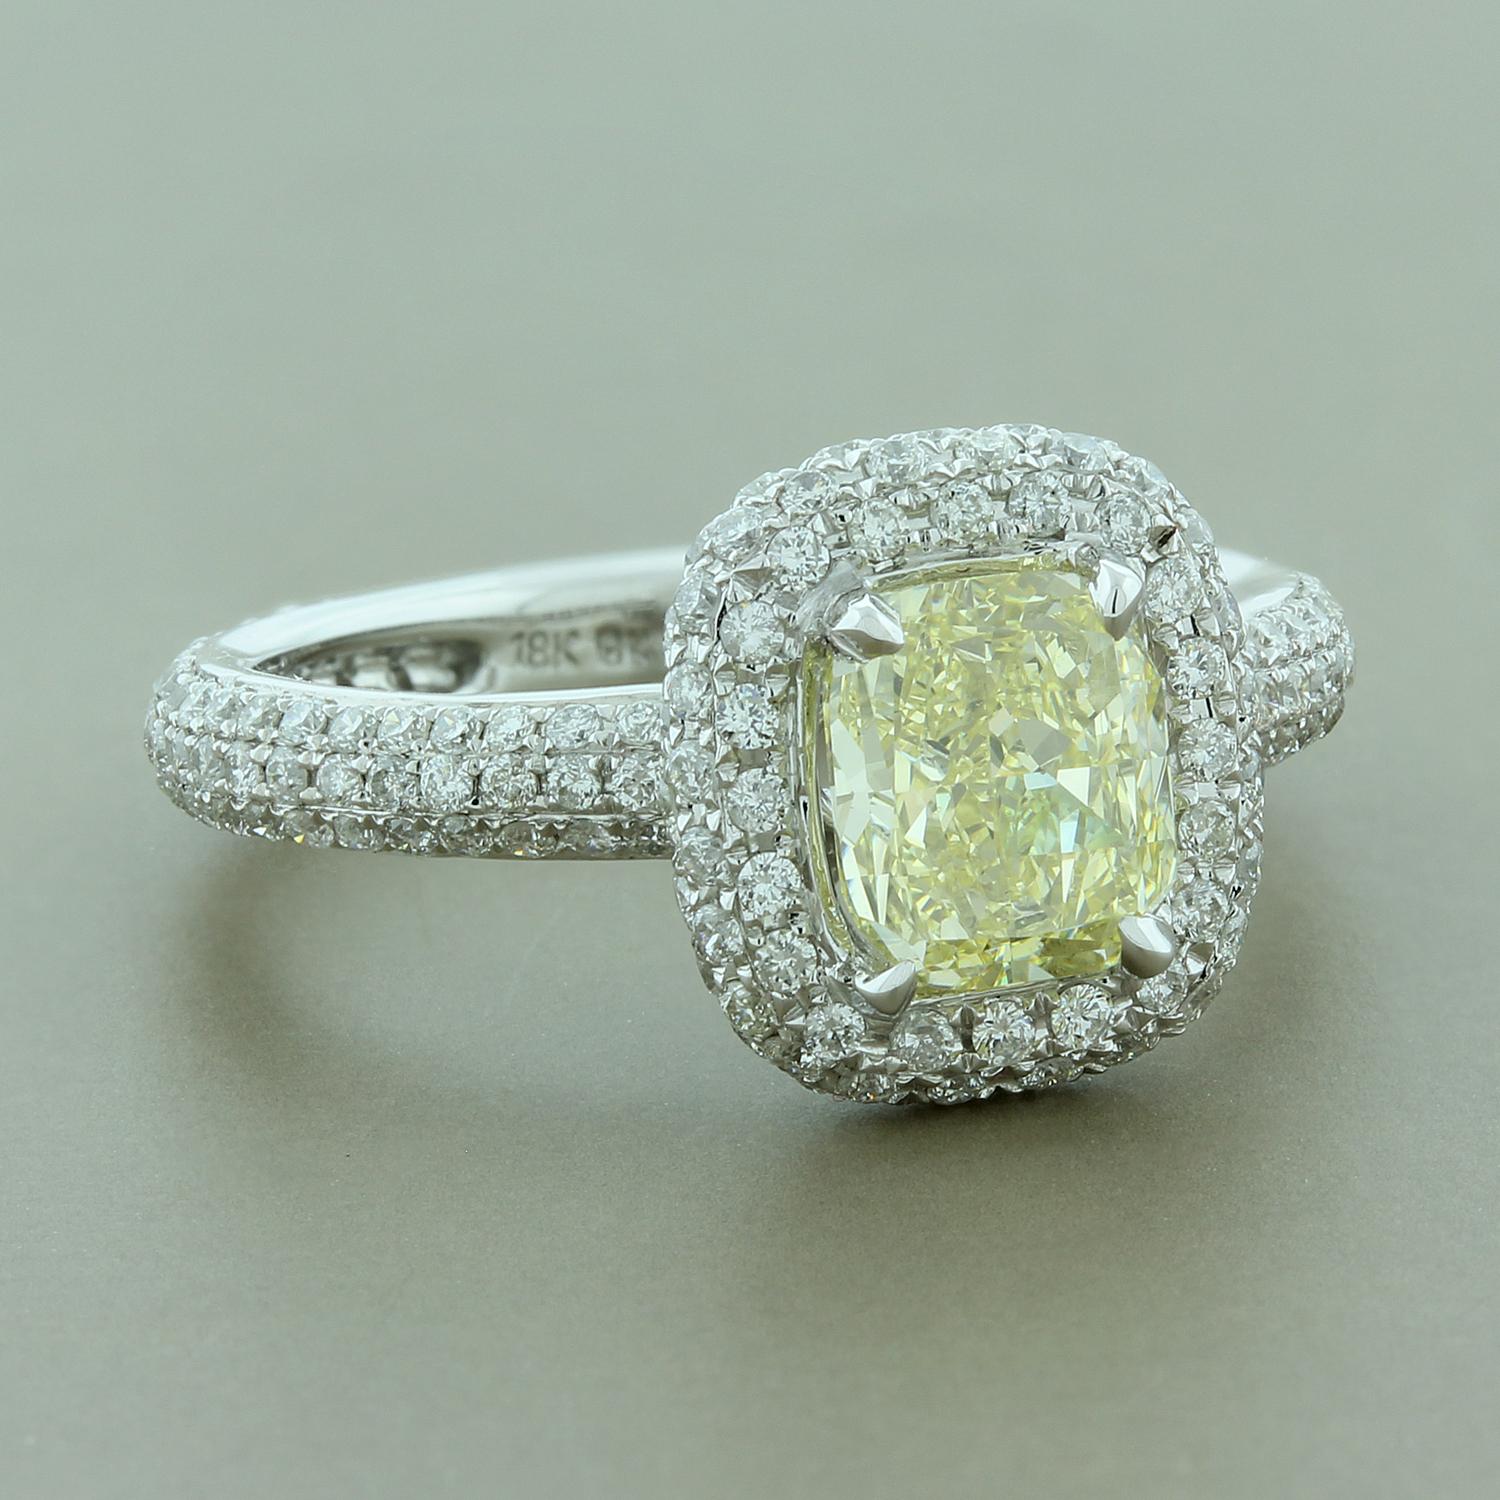 A unique engagement ring for a one-of-a-kind woman! This 1.32 carat fancy yellow emerald cut diamond is haloed by round cut glistening white micro-pave set diamonds. The rest of the 18K white gold ring is micro pave set with brilliant cut diamonds